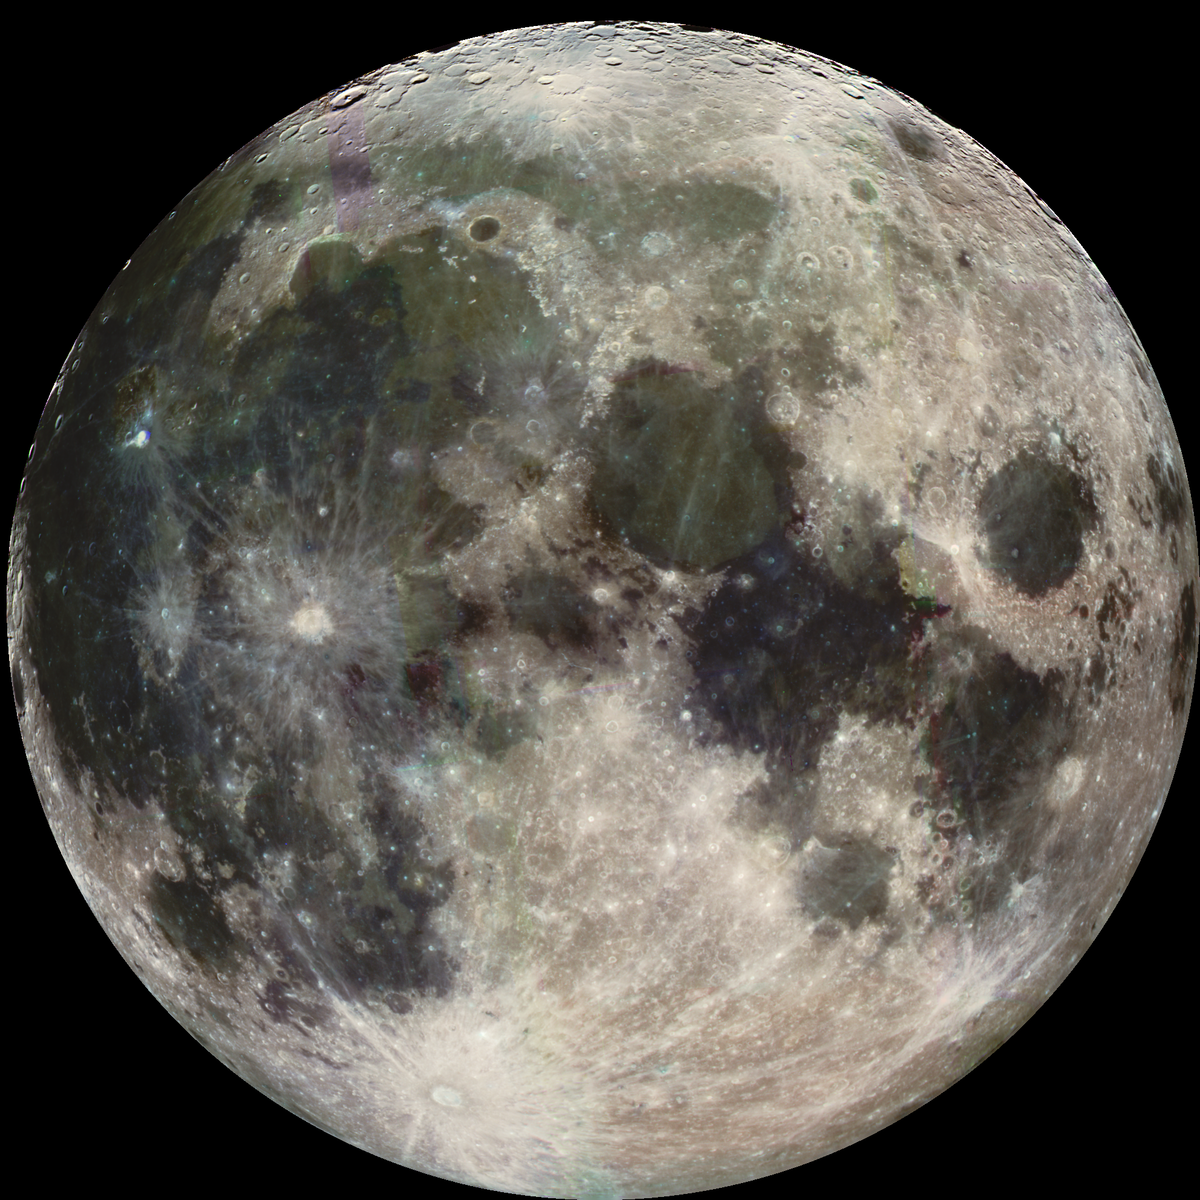 First Quarter Moon Png - Full Moon Transparent Background, Png